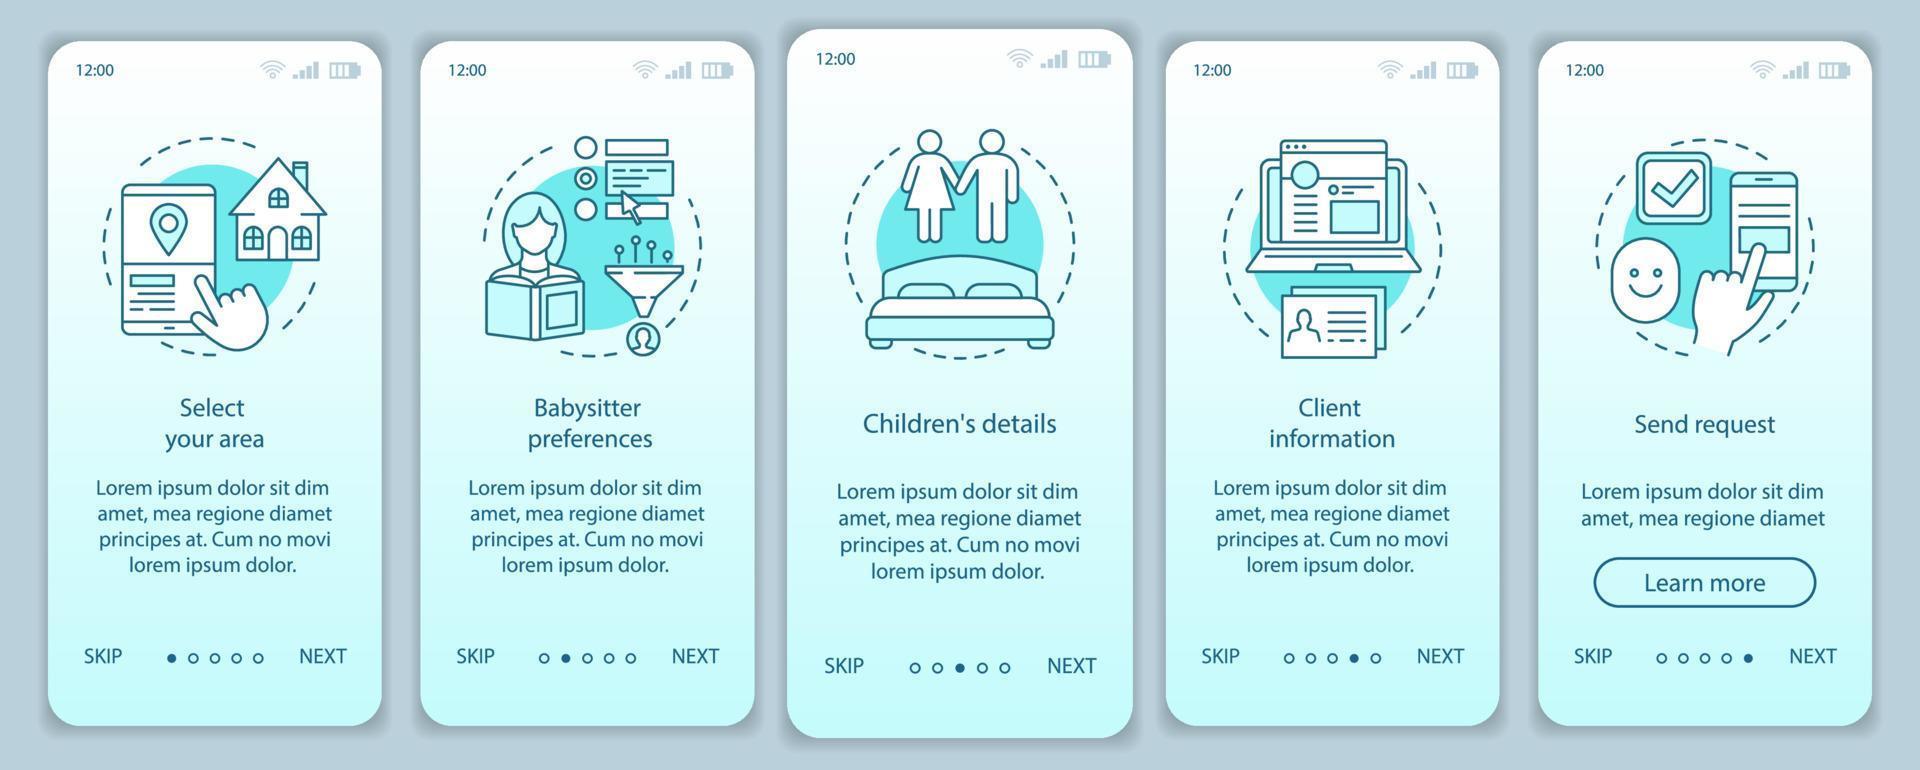 Babysitter choosing onboarding mobile app page screen vector template. Childcare service reservation. Nanny booking. In-home babysitting. Walkthrough website steps. UX, UI, GUI smartphone interface